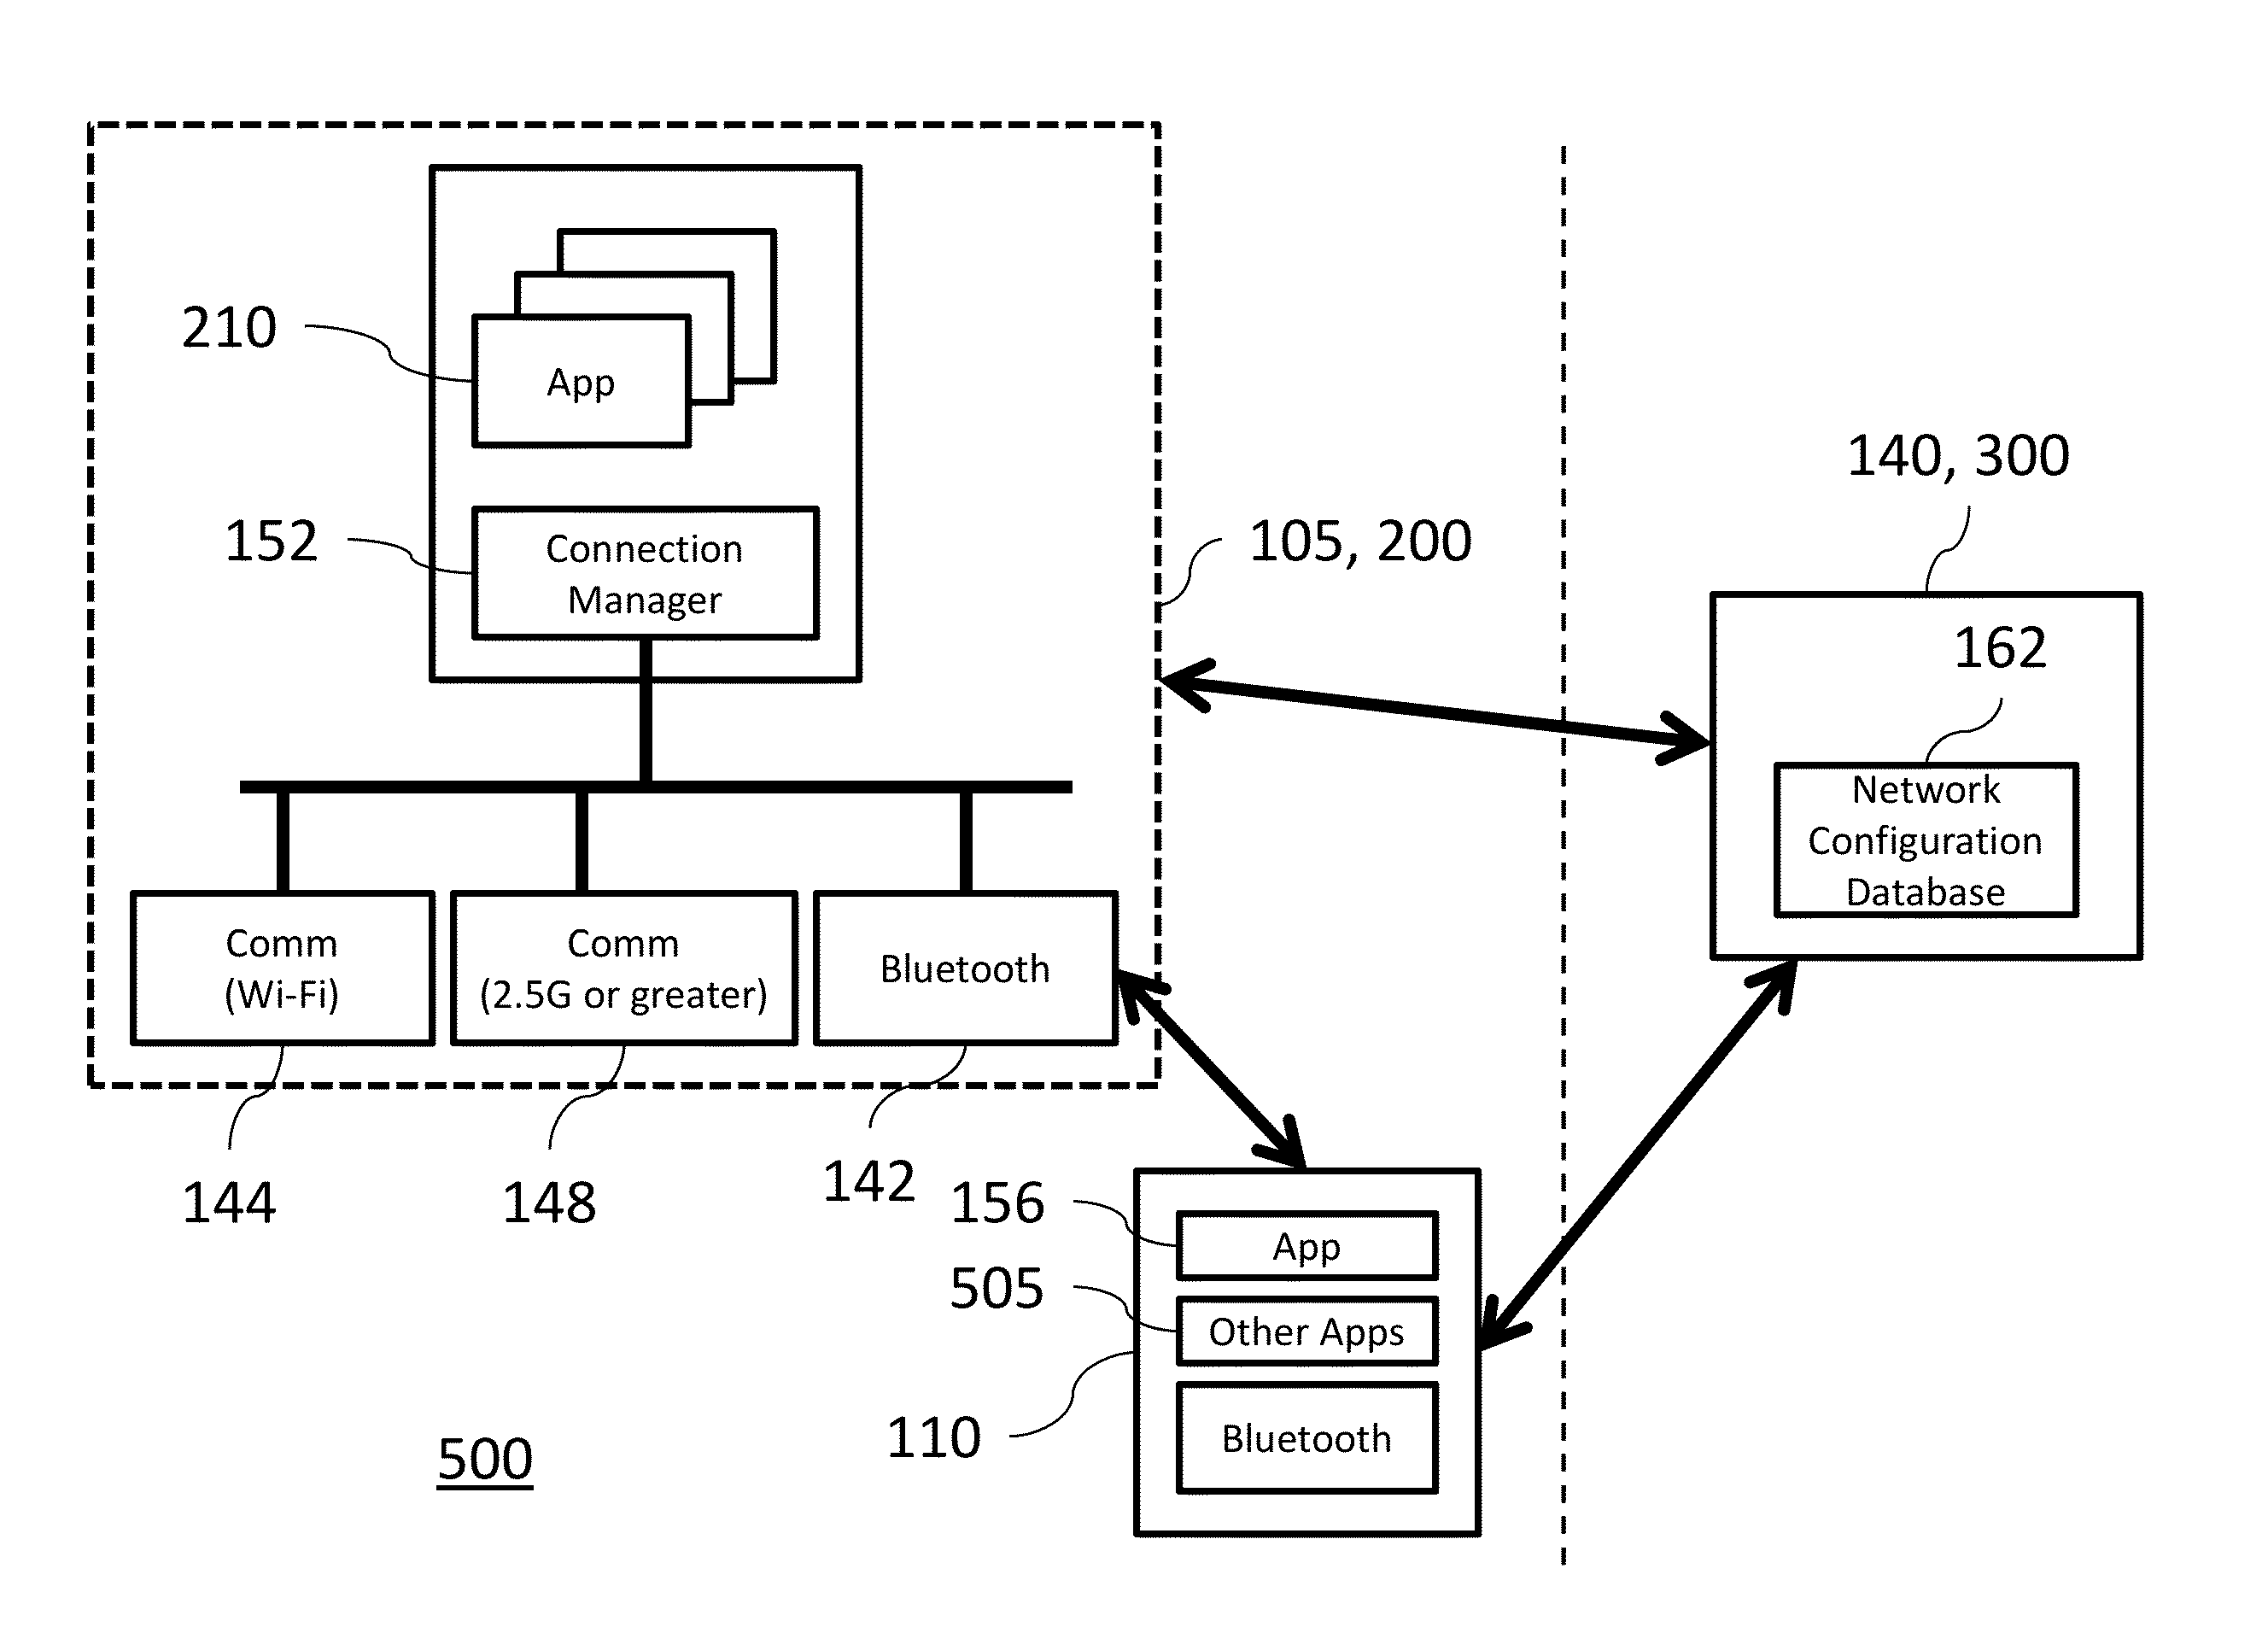 Method and system for providing configurable communication network routing